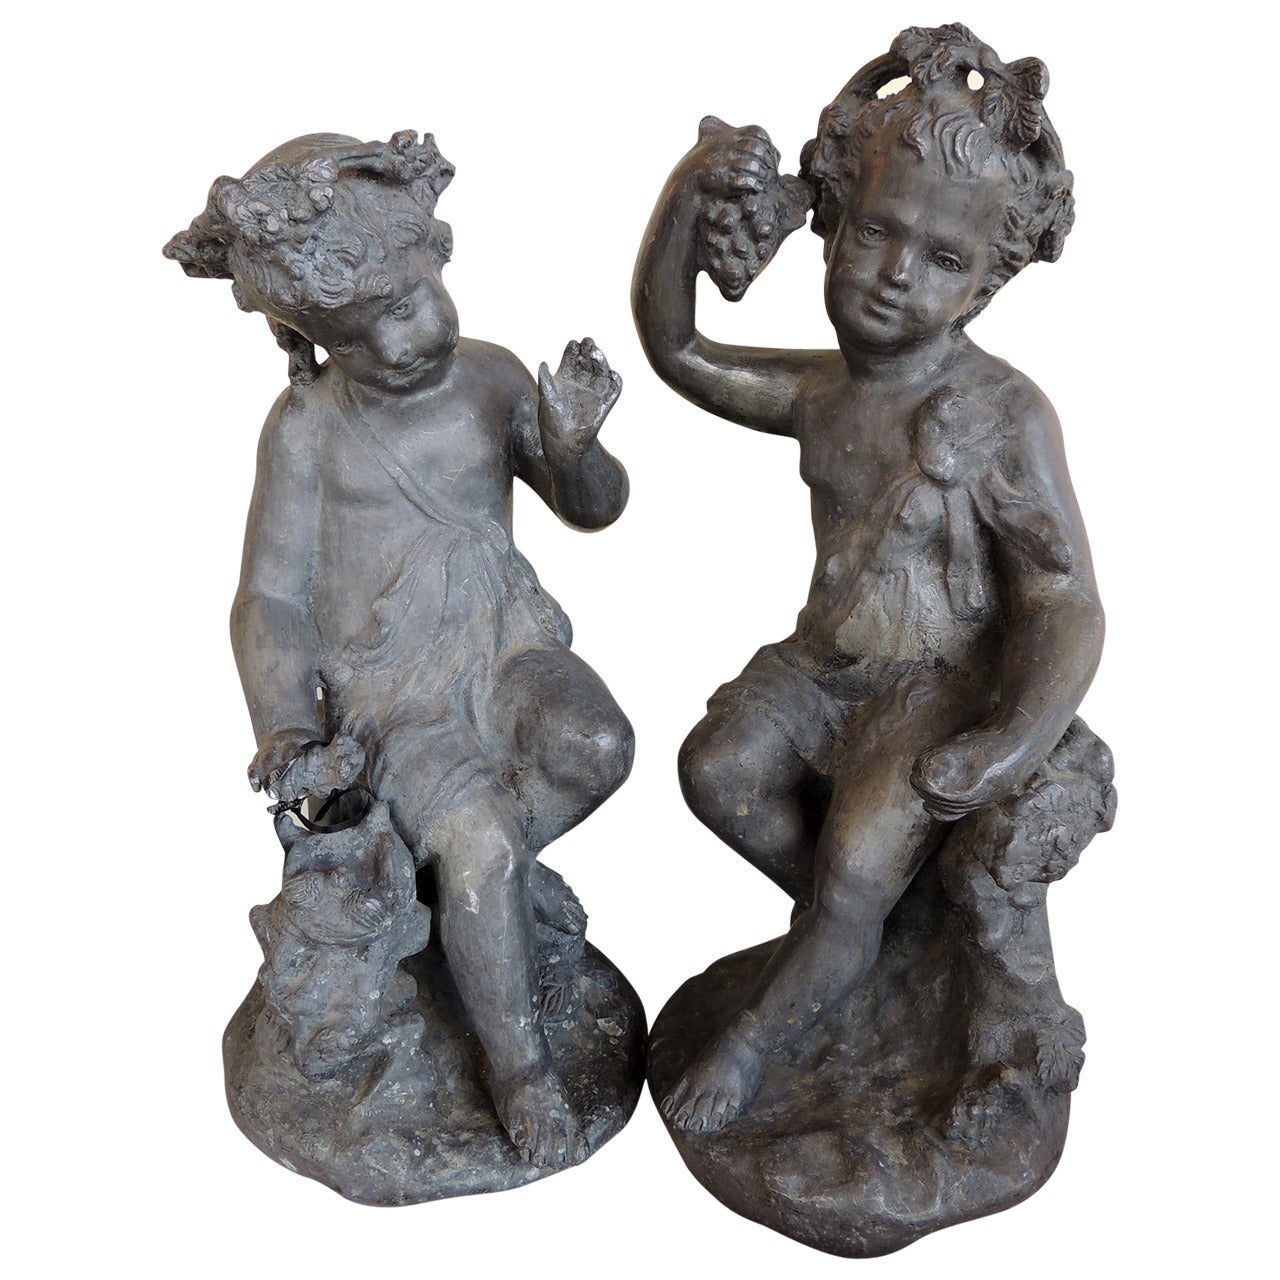 Pair of Lead Garden Statues